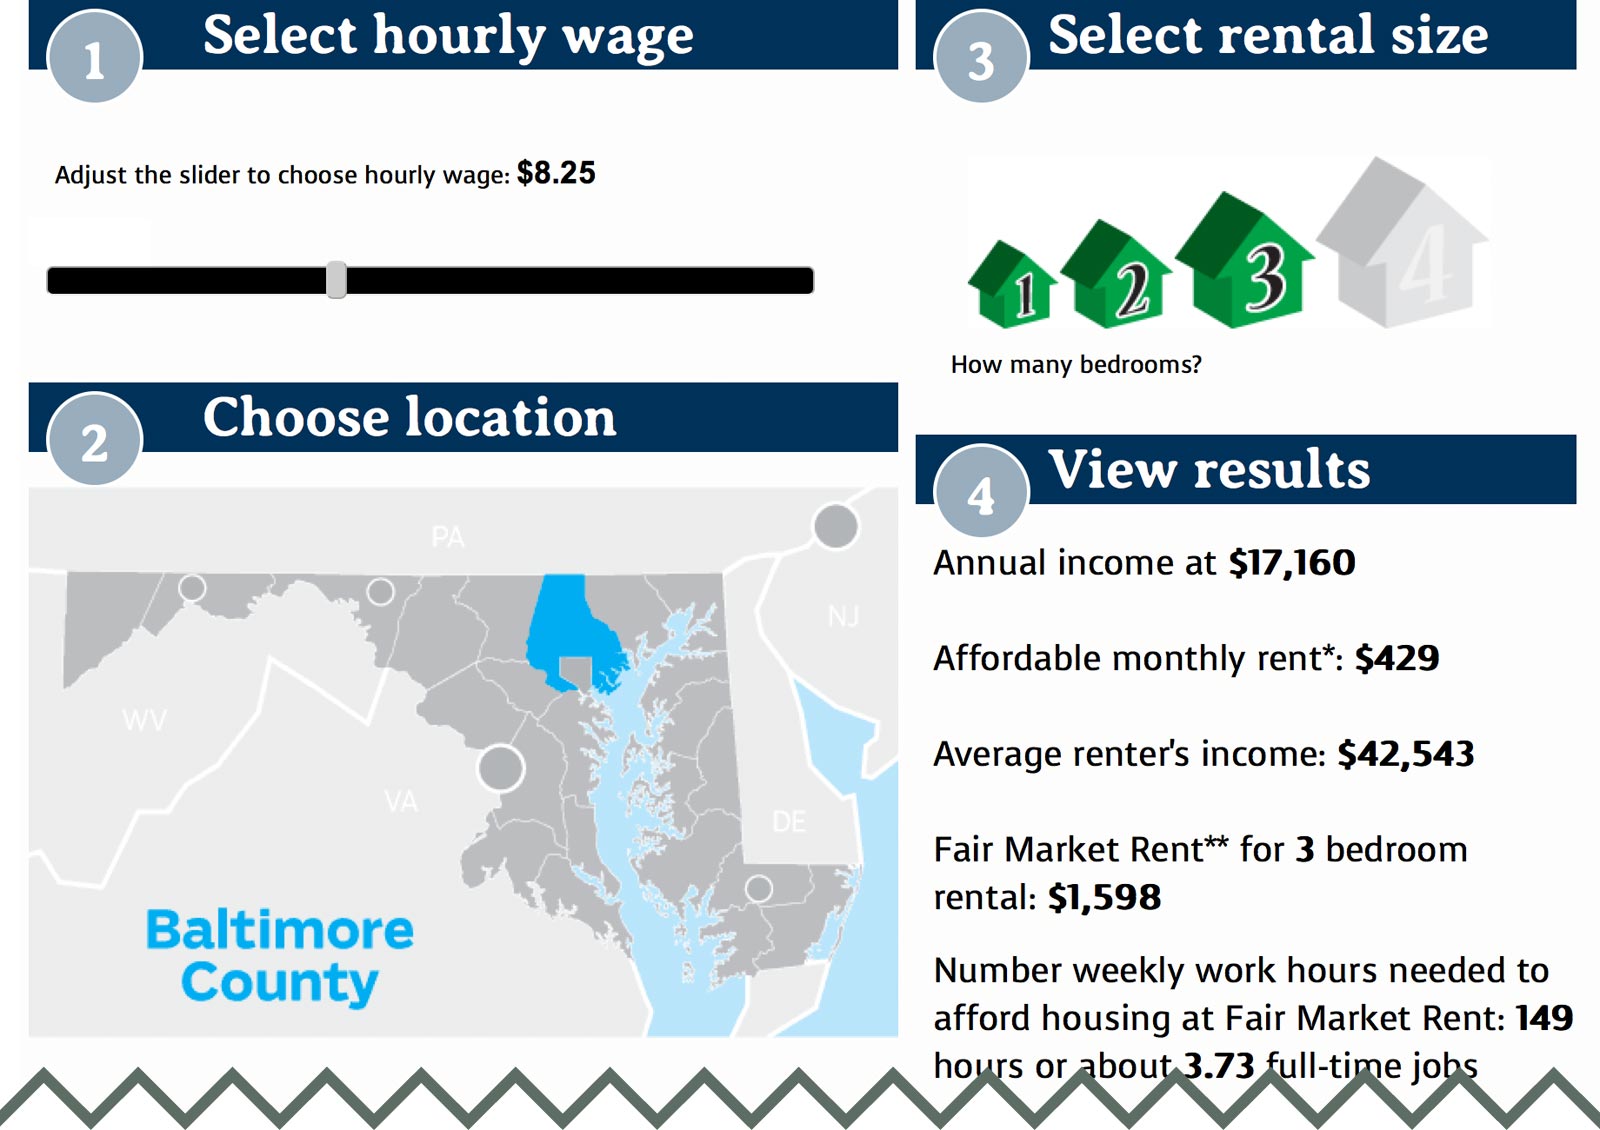 Through the roof: Low income/minimum wage renters